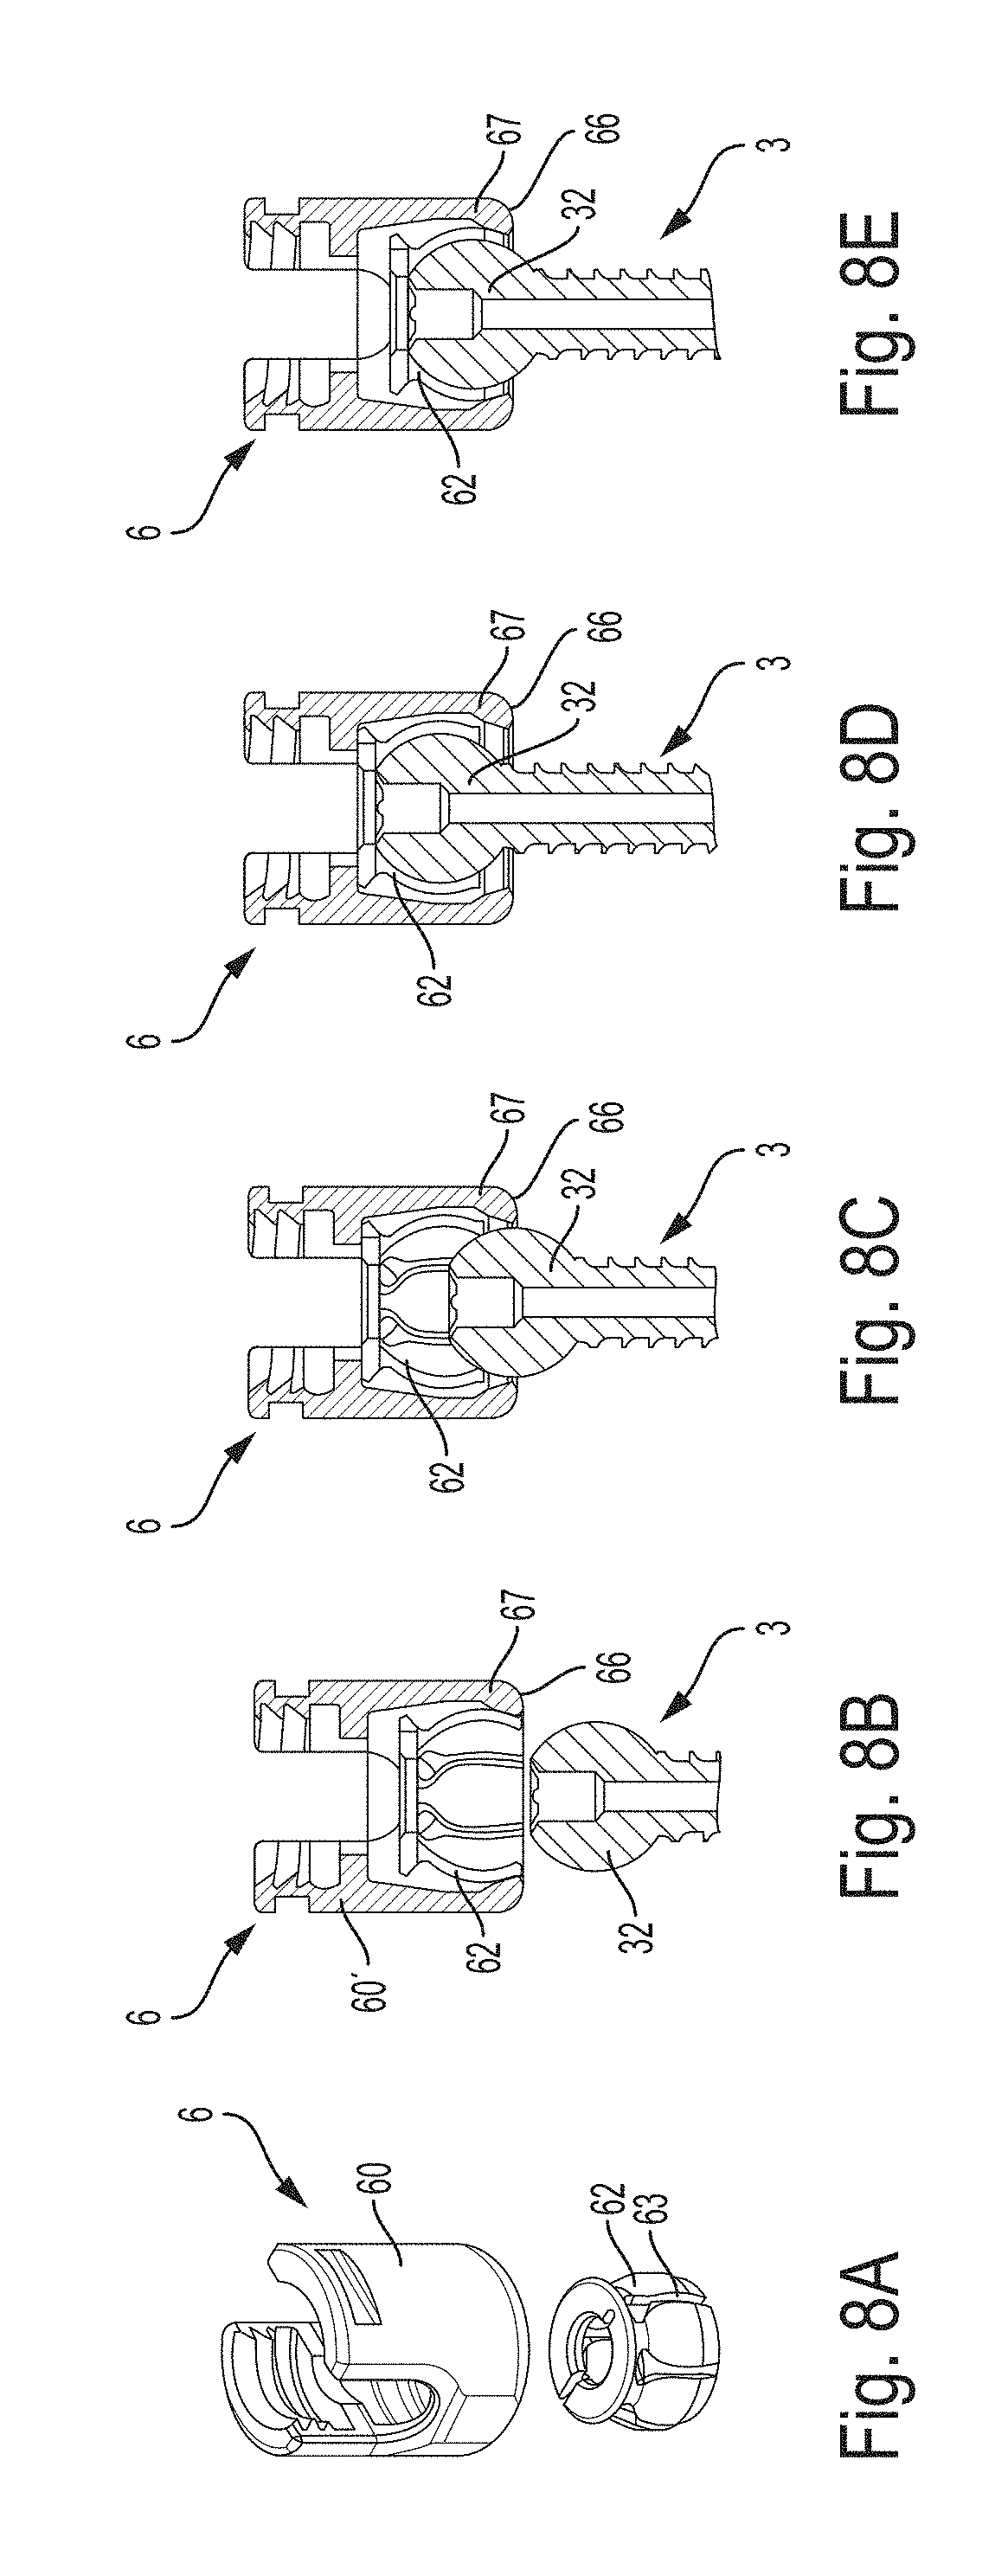 Spinal multi-level intersegmental stabilization system and method for implanting